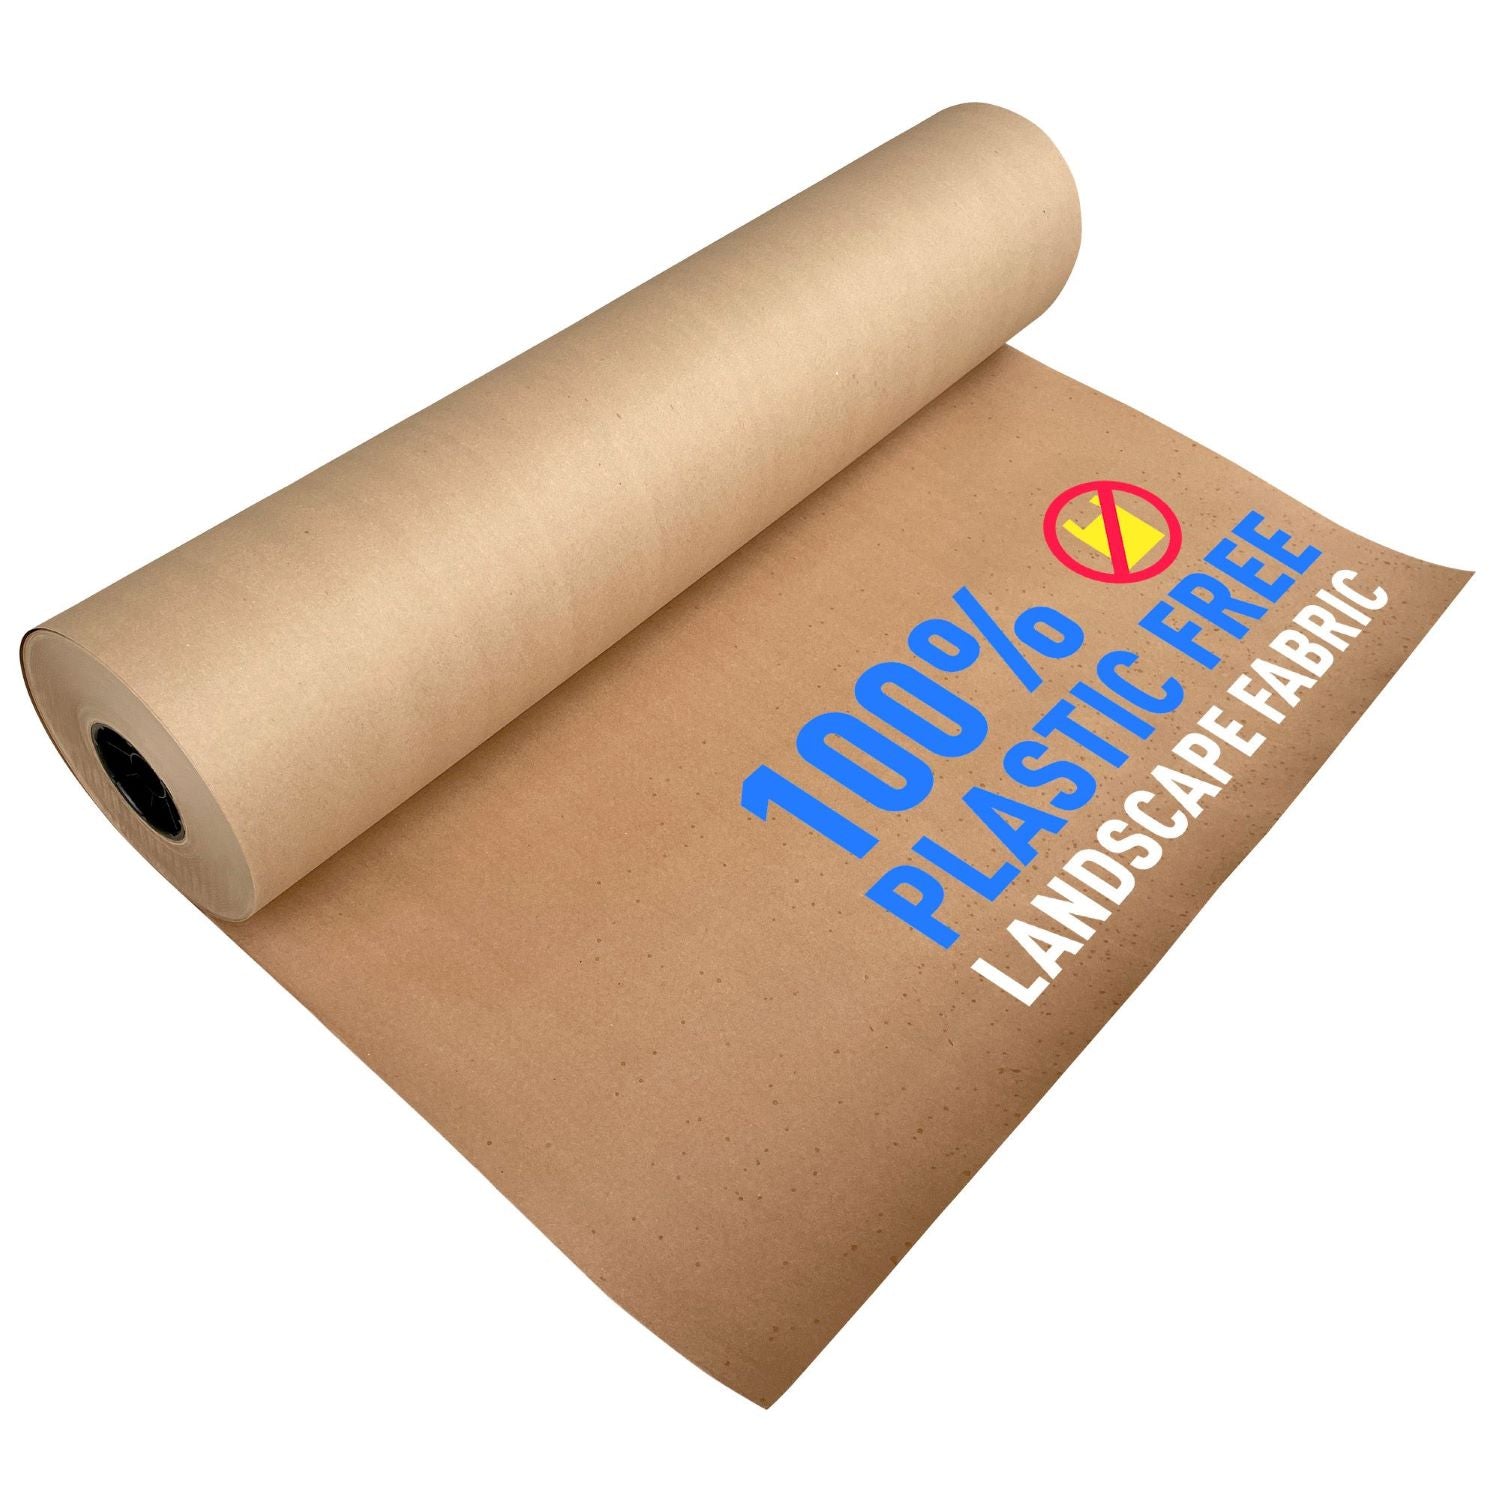 24 in. x 24 in. 100% Recycled Packing Paper (200-Sheets)